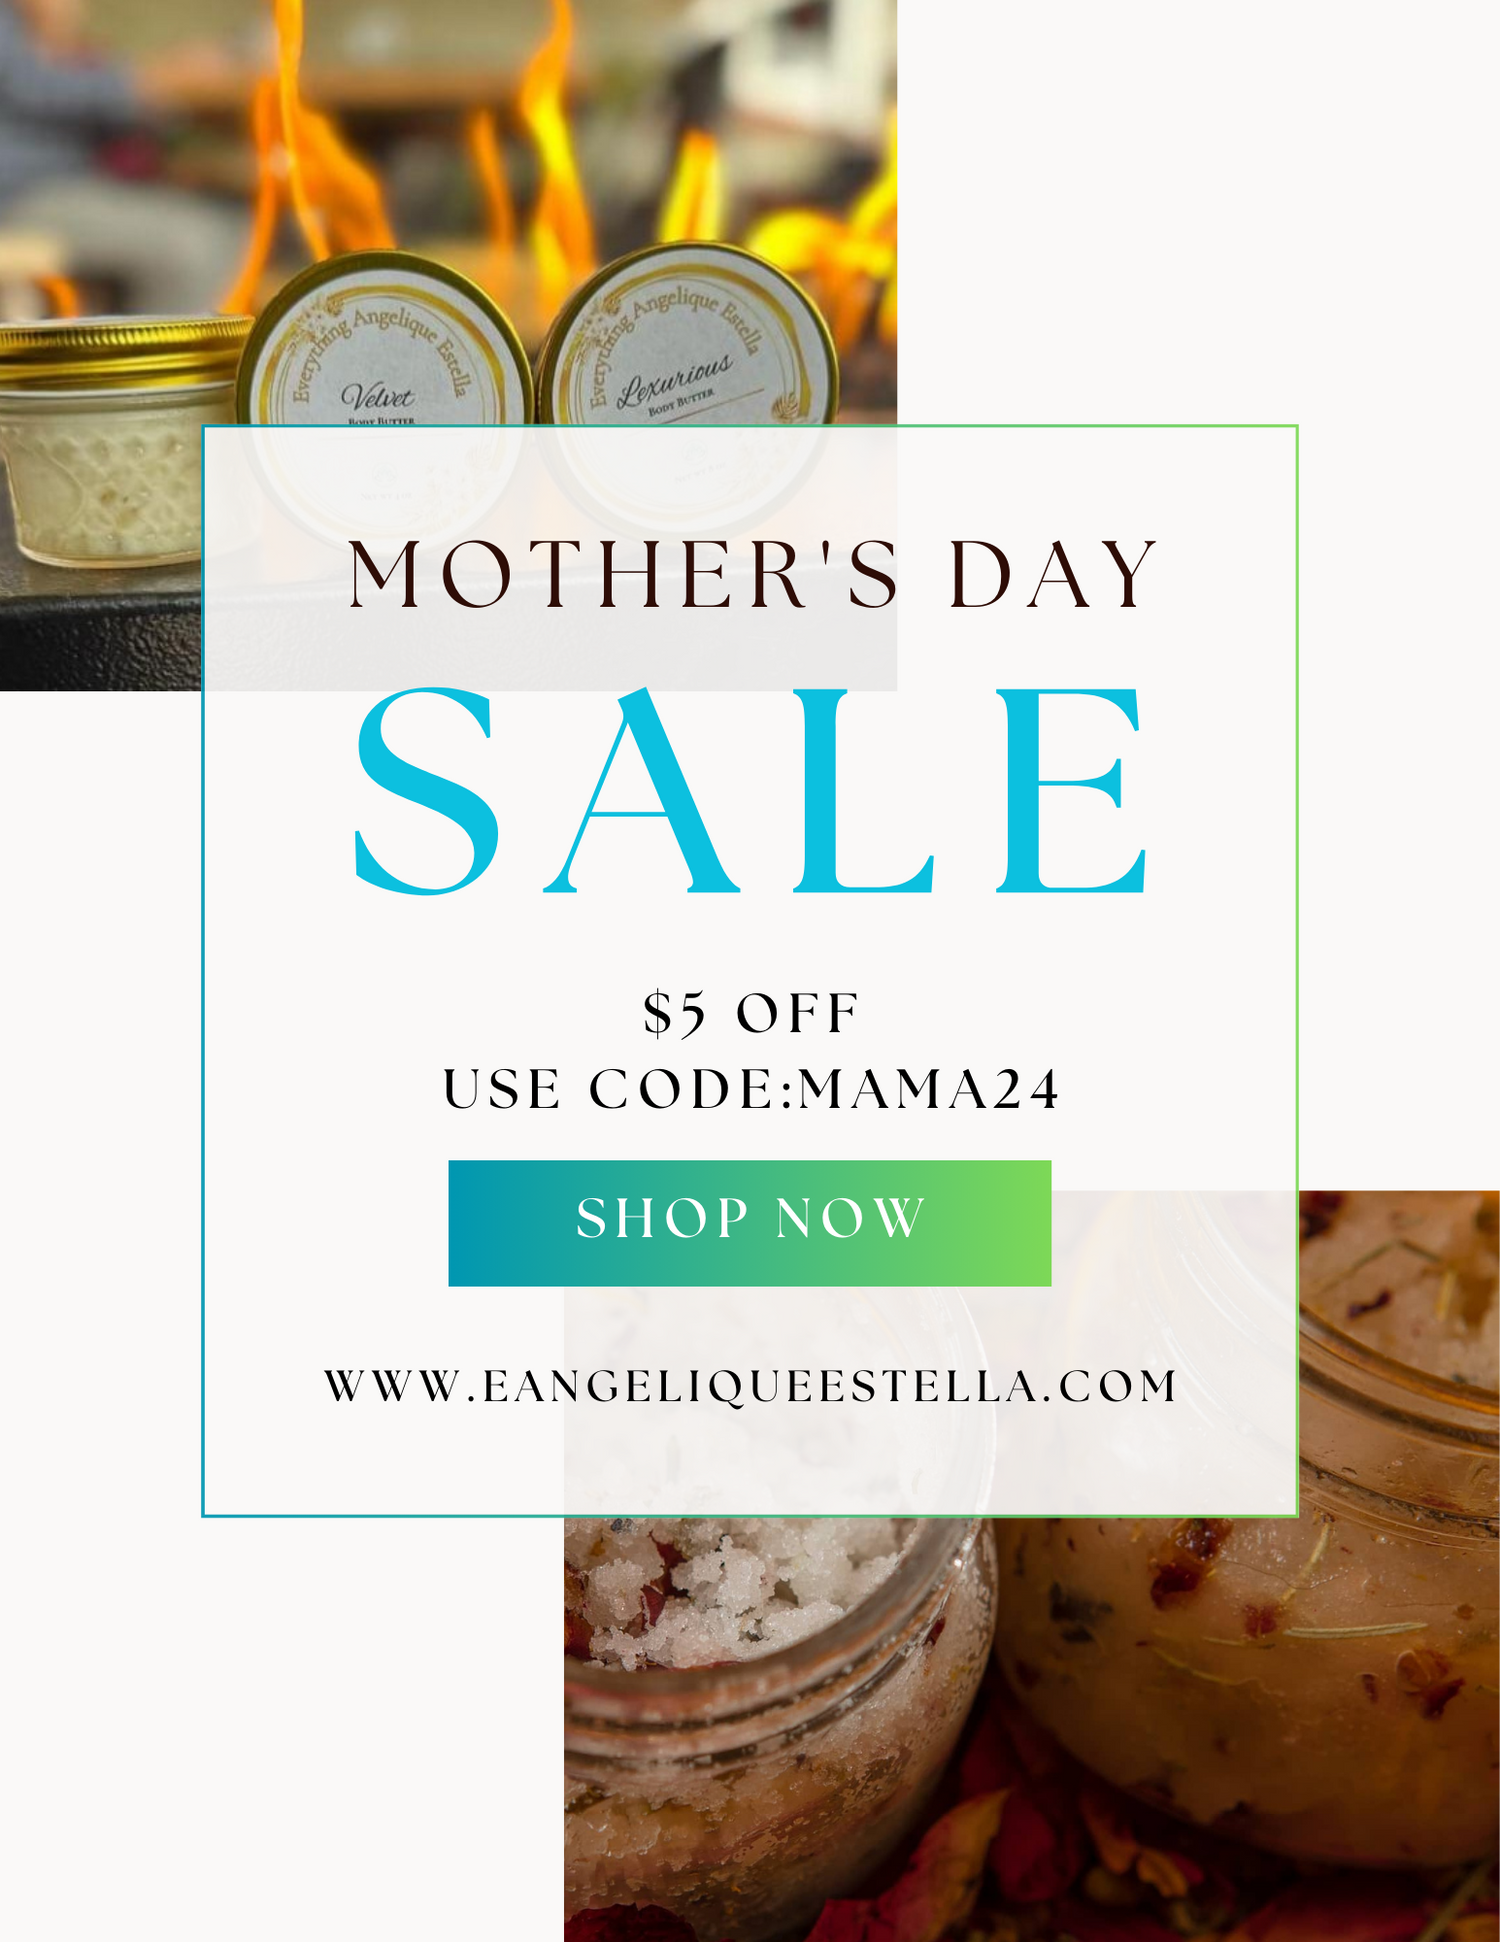 Make Mom's day extra special with our Mother's Day sale! Enjoy $5 off when you mix and match 2 of our sumptuous 4 oz shea butters, sugar scrubs, or indulge in one of each. Use code Mama24 at checkout to treat her to the ultimate pampering experience. Don't miss out on our charming gift box options for a beautifully curated surprise!